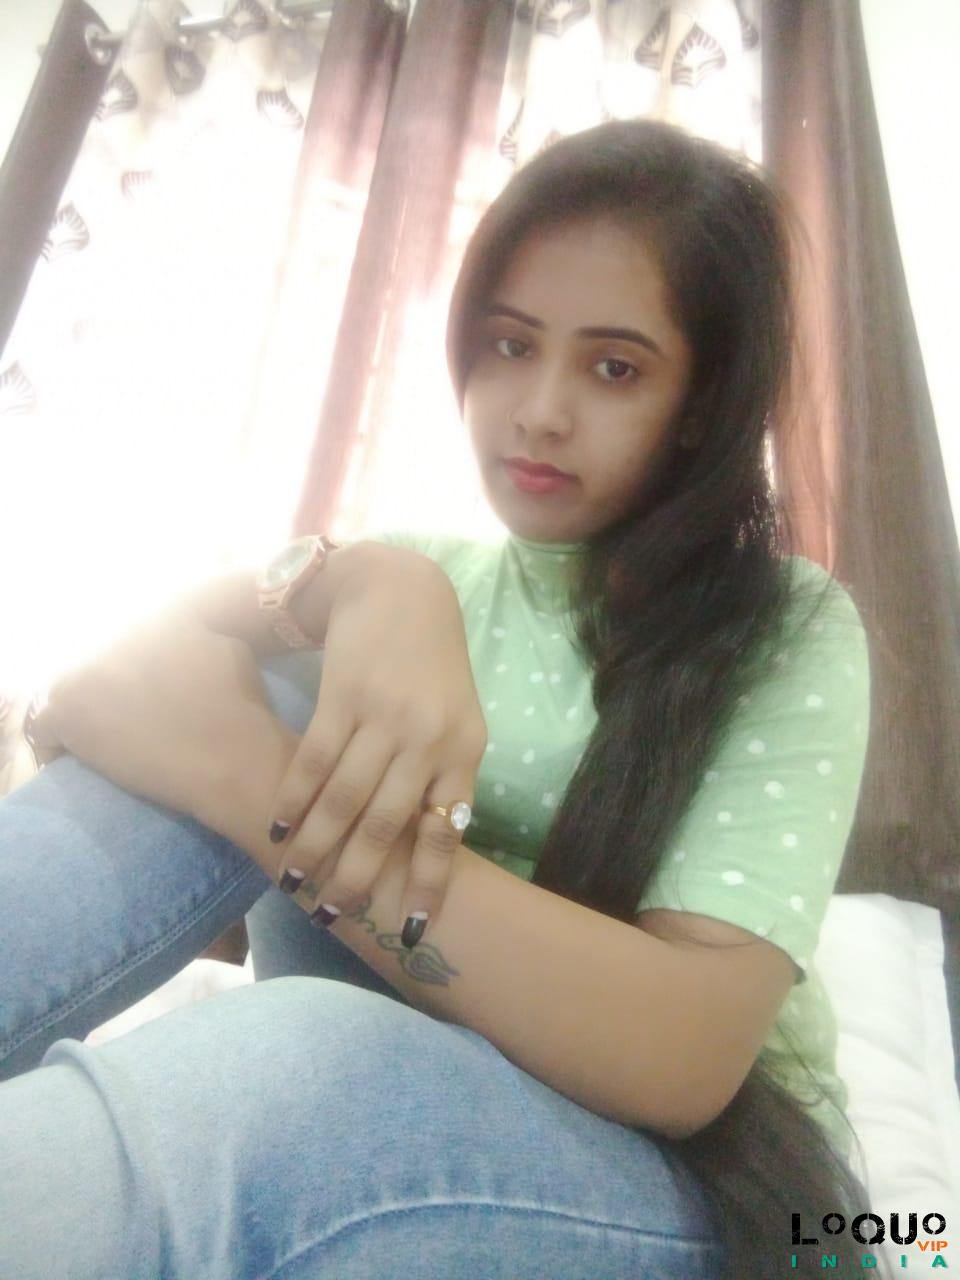 Call Girls Haryana: You will come to see me I am a vice fiery with a rich pussy to love only cash pa